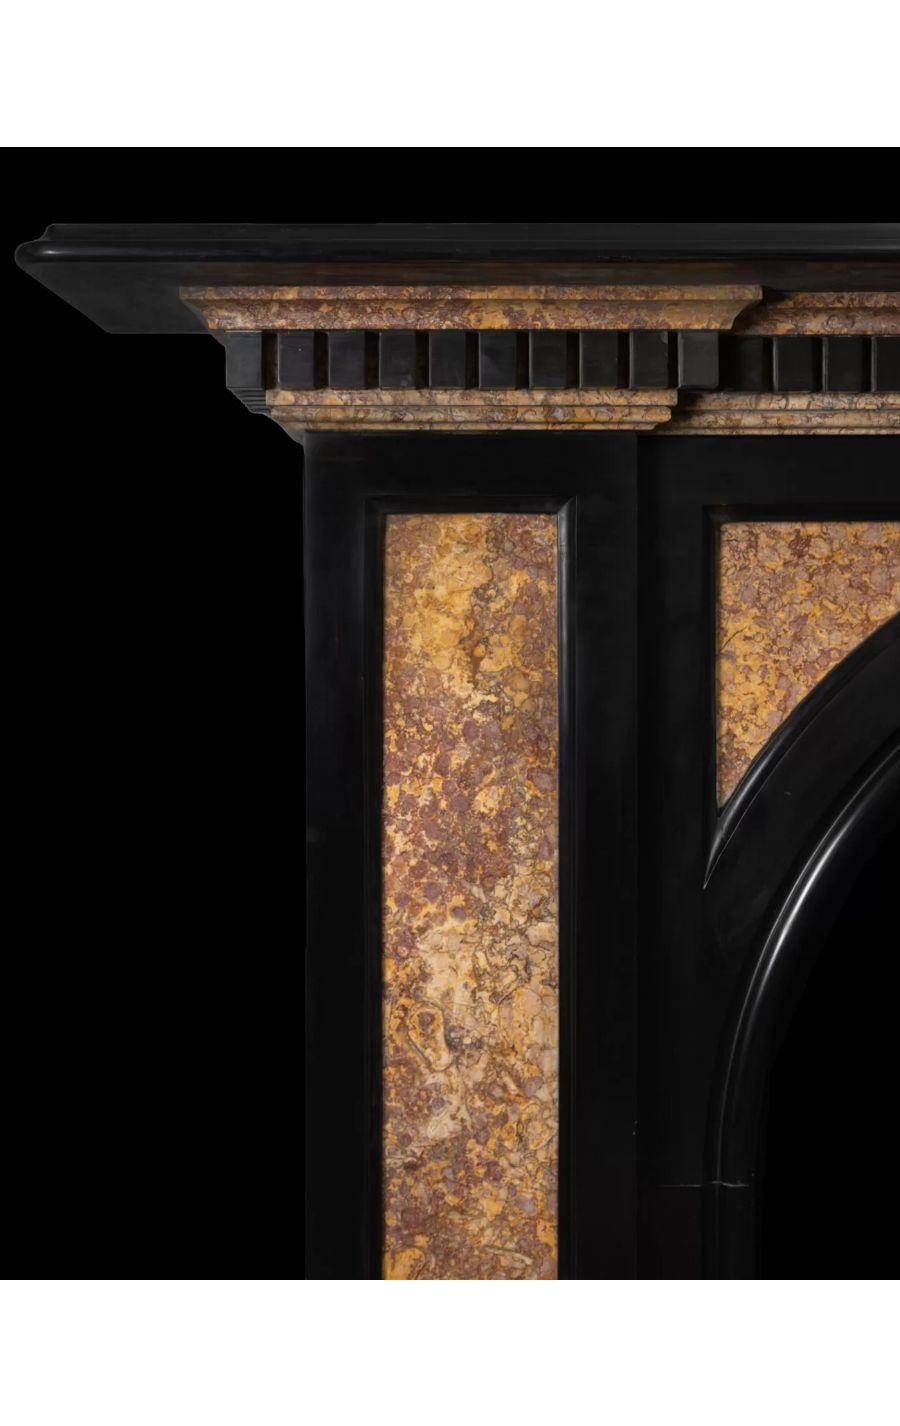 A large antique black marble fireplace with coloured Brocattele marble panels and mouldings.

The black marble pilasters and arch spandrels have recessed and inlaid panels of semi-precious Spanish Brocattella marble. The layered Brocattella